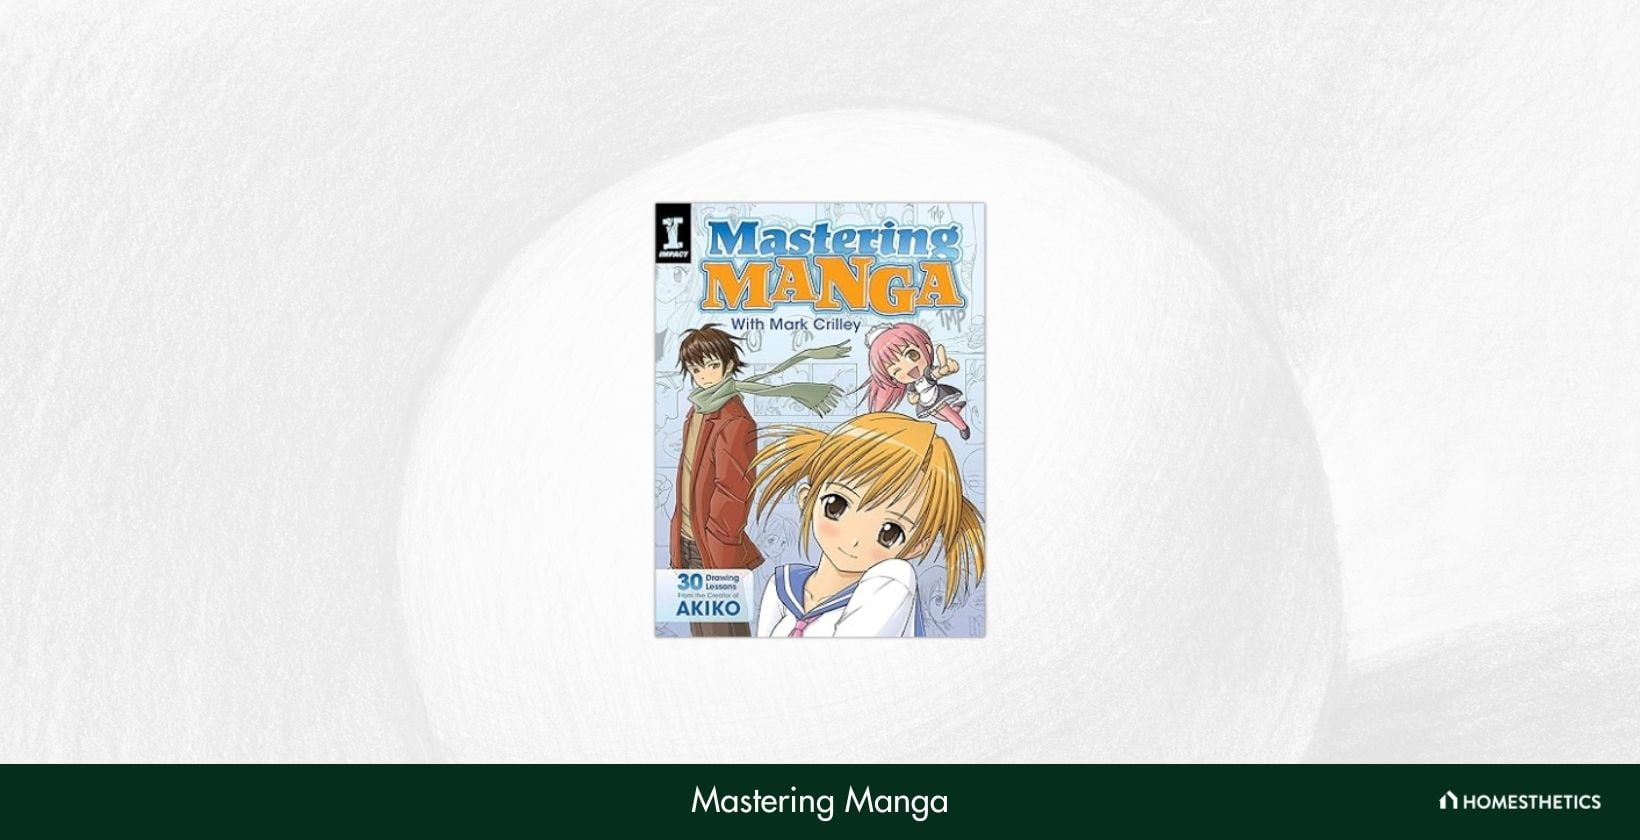 Mastering Manga with Mark Crilley 30 drawing lessons from the creator of Akiko